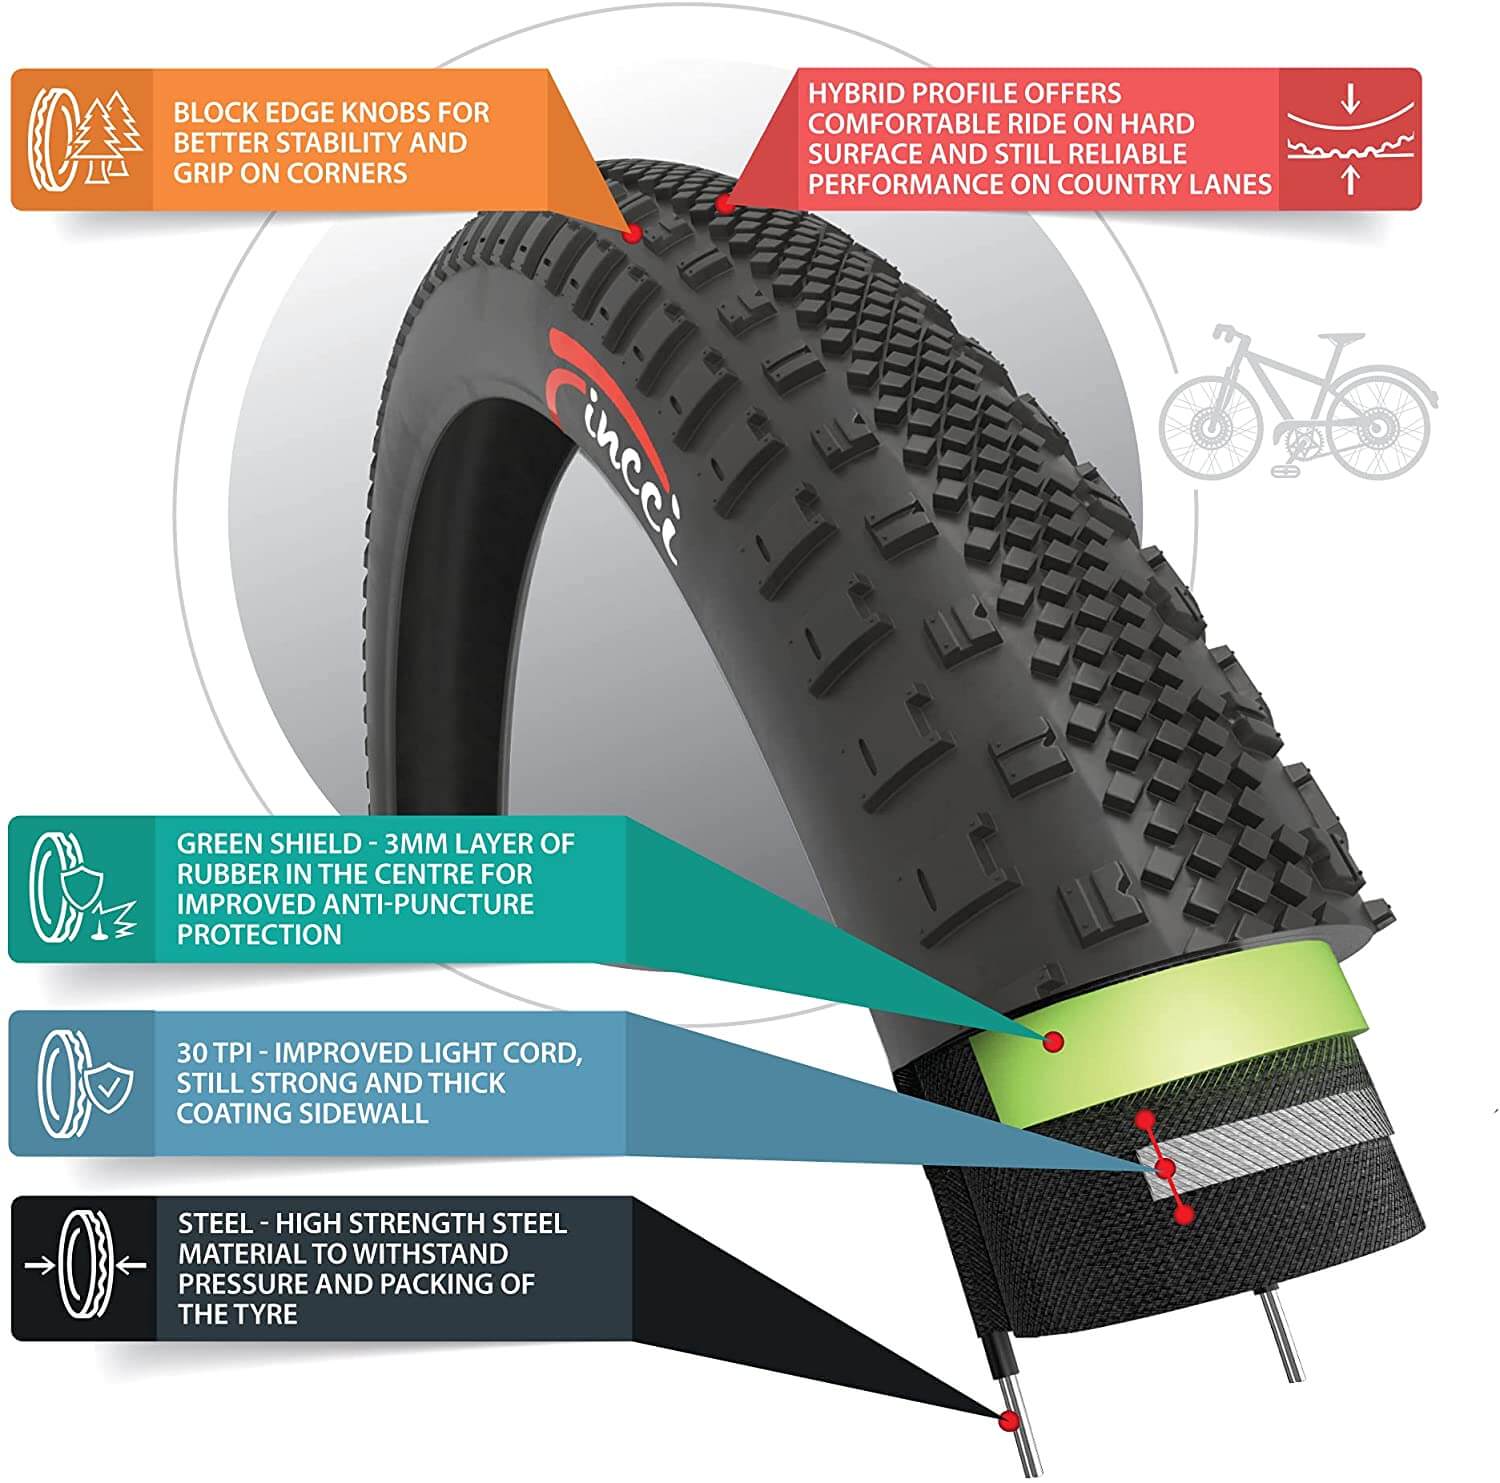 Pack of 2 Fincci Pair 700x35c Tire Foldable 37-622 with 1mm Antipuncture Protection for Cycle Road Mountain MTB Hybrid Touring Electric Bike Bicycle with 700 x 35c Tires 